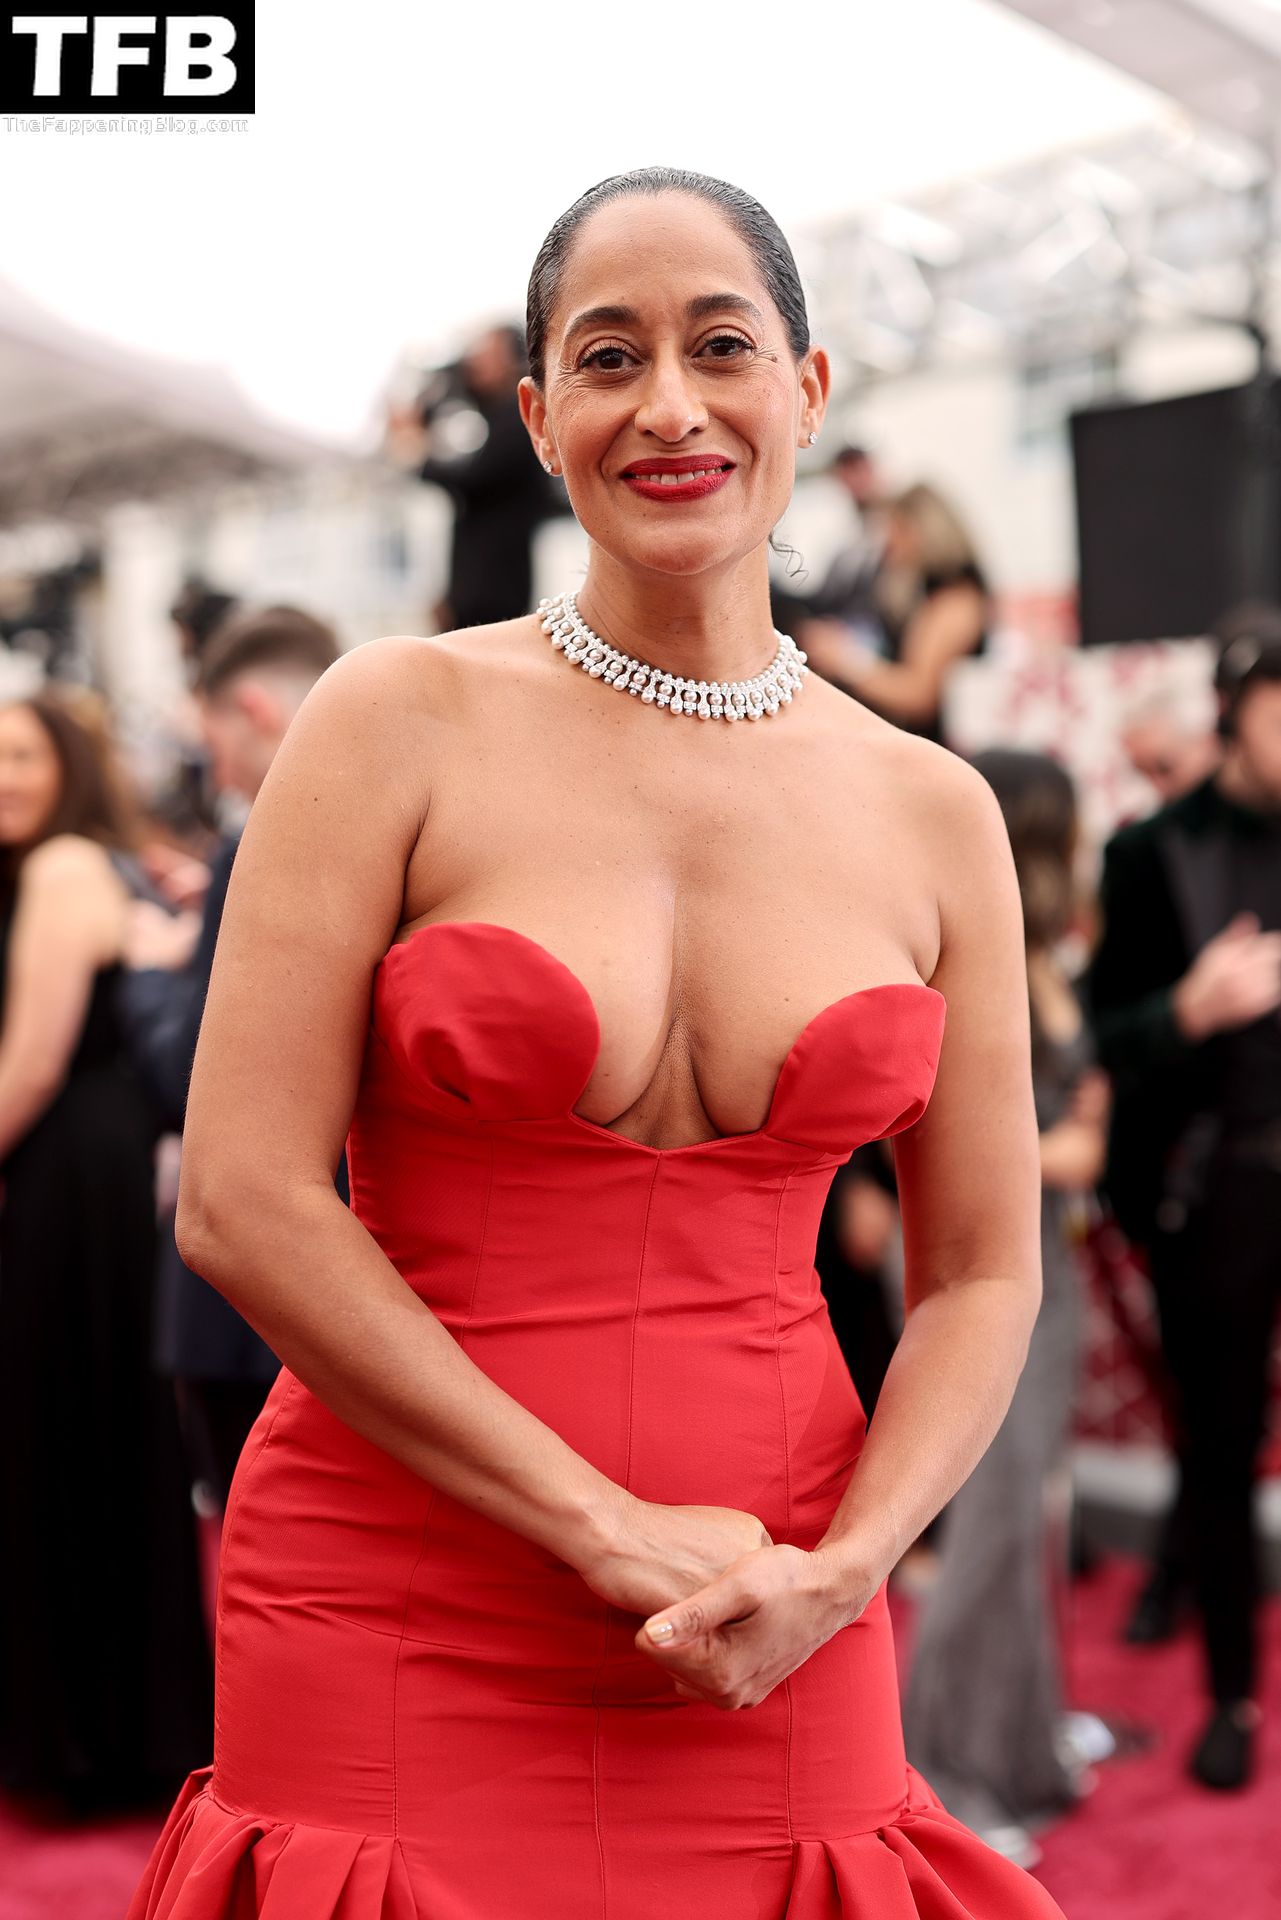 Tracee-Ellis-Ross-Sexy-The-Fappening-Blog-21.jpg